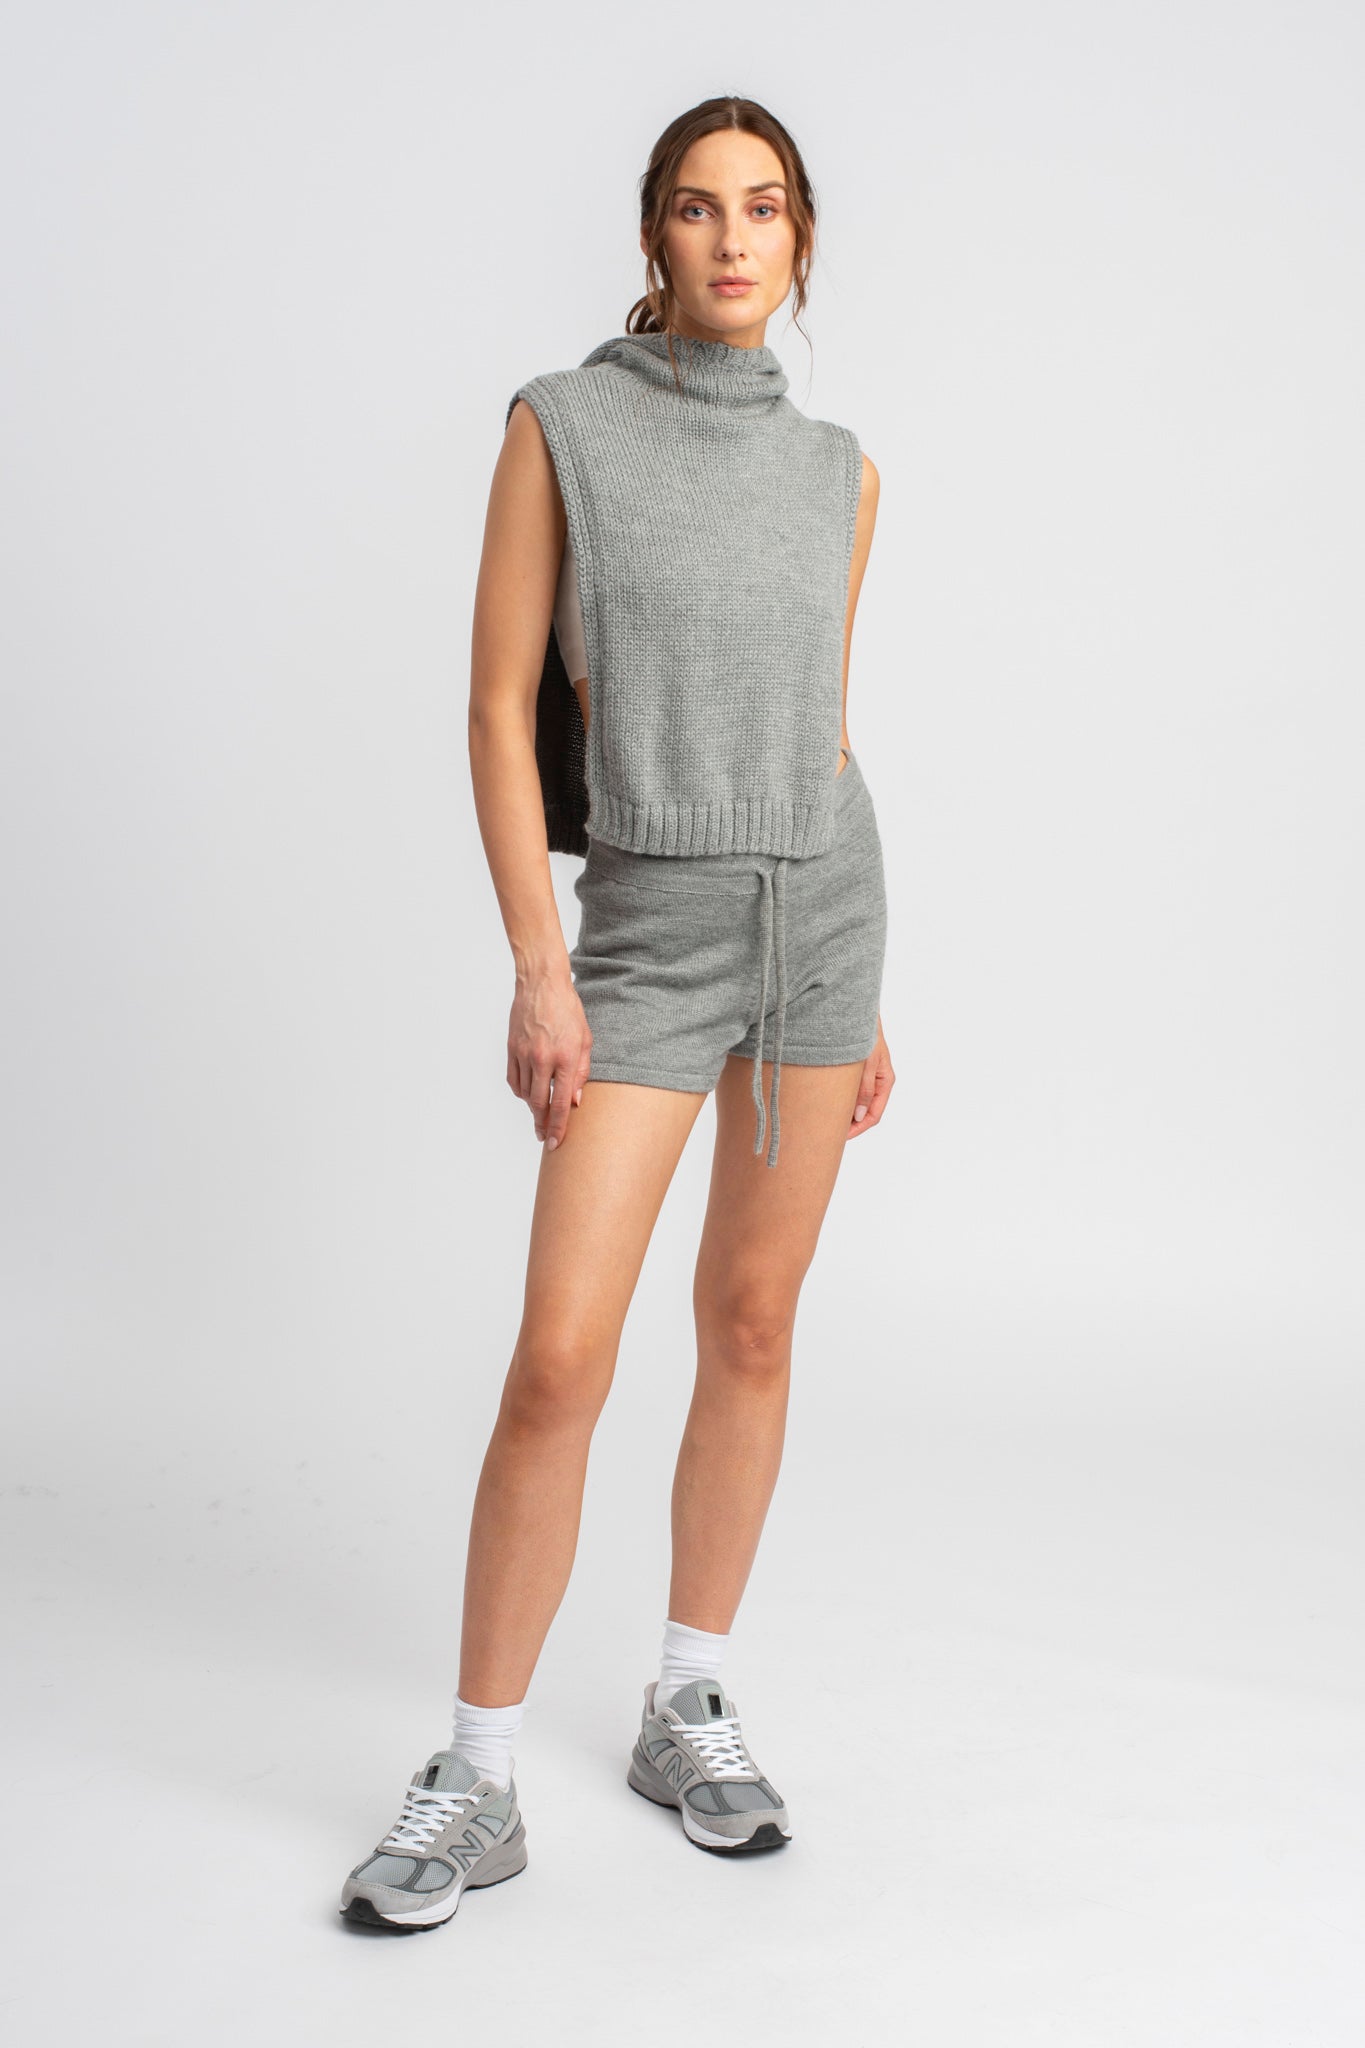 Model wearing poncho in light grey alpaca wool with matching shorts